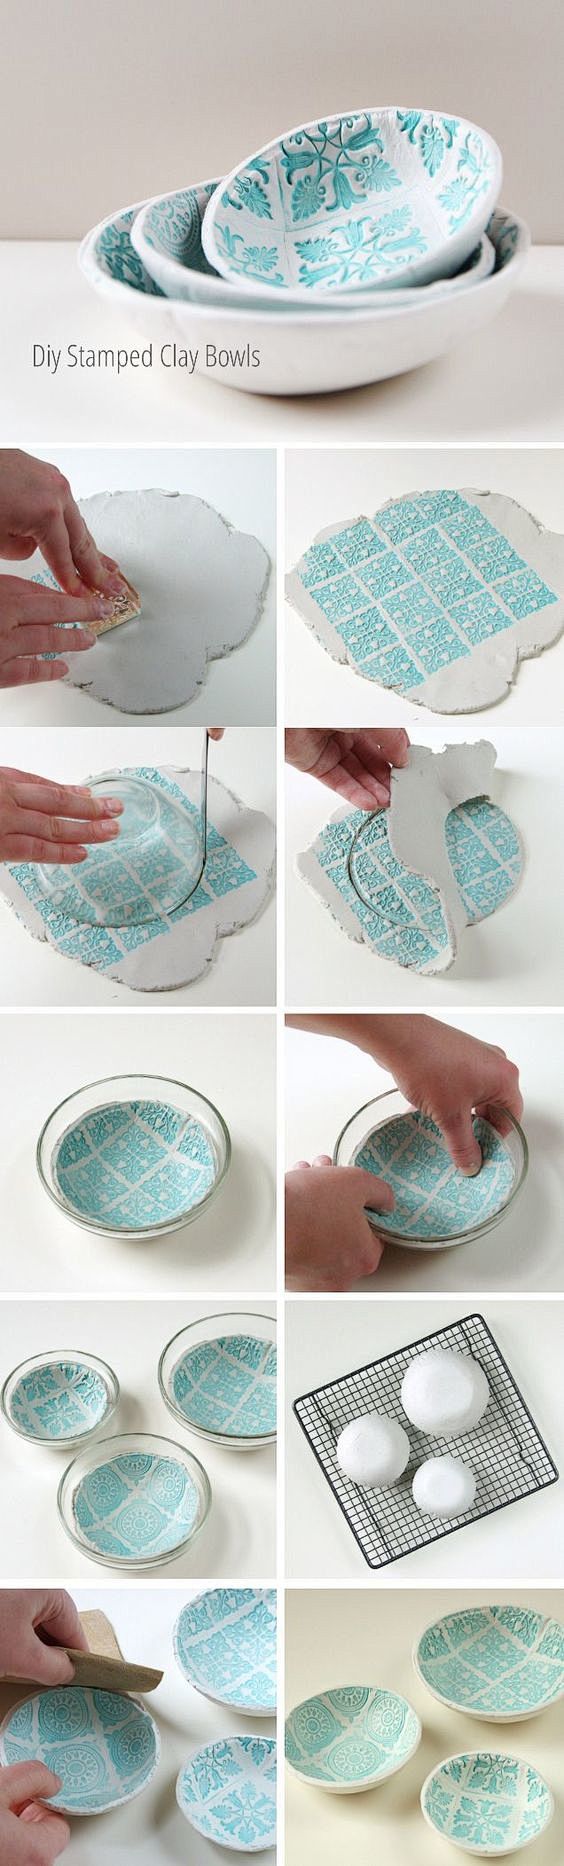 Diy Stamped Clay Bow...